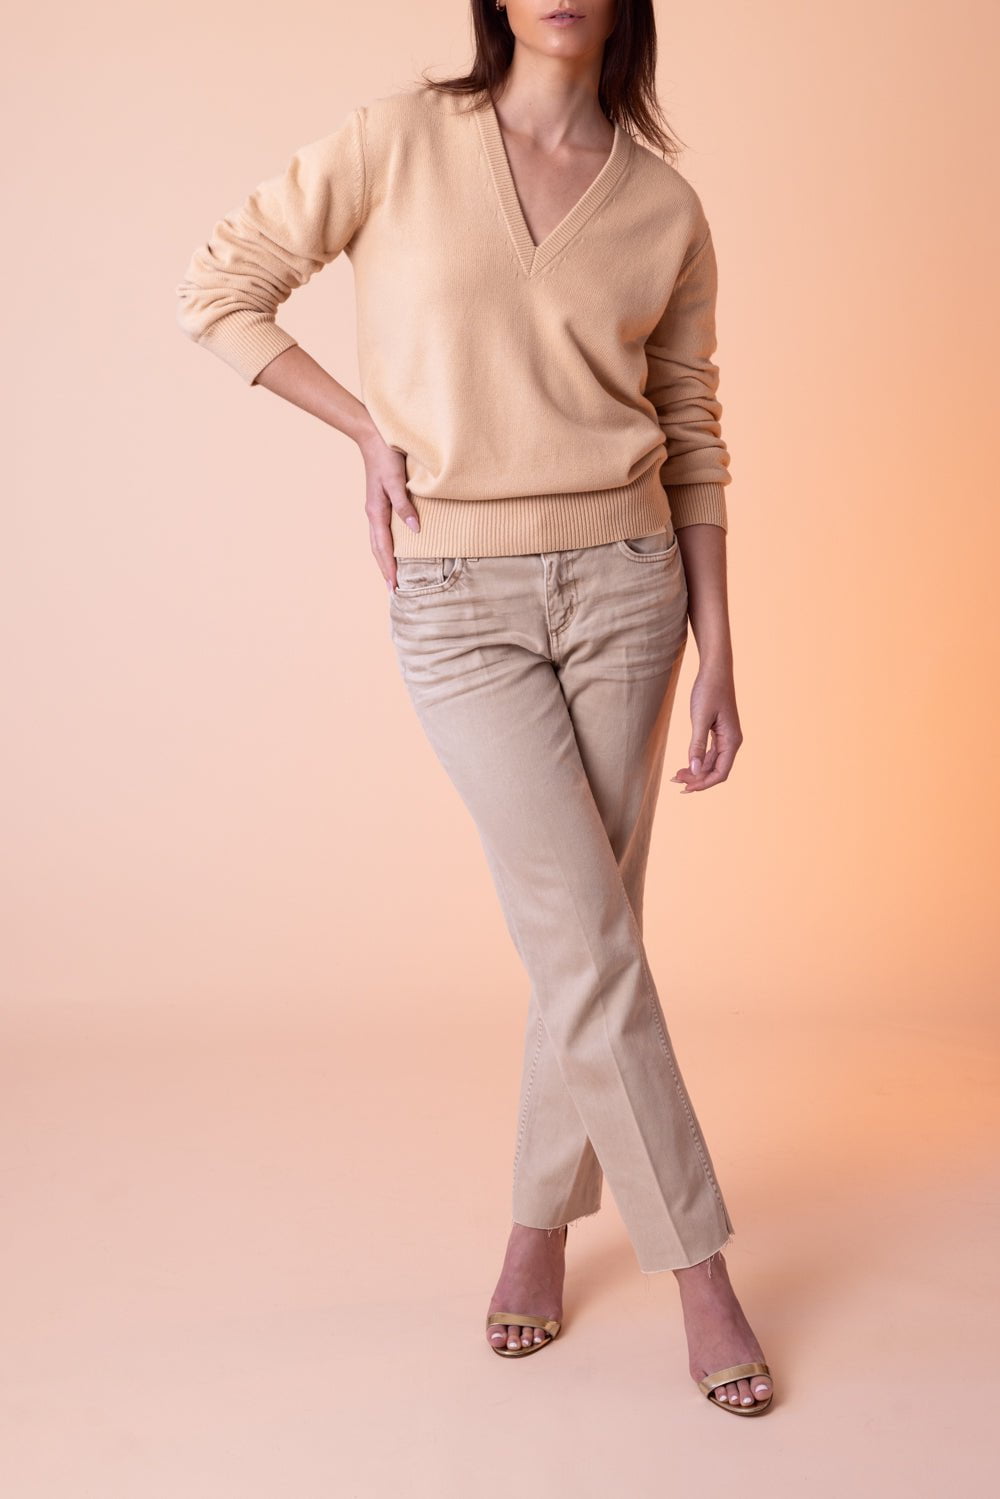 Crushed Sleeve Sweater - Nude CLOTHINGTOPSWEATER MICHAEL KORS COLLECTION   